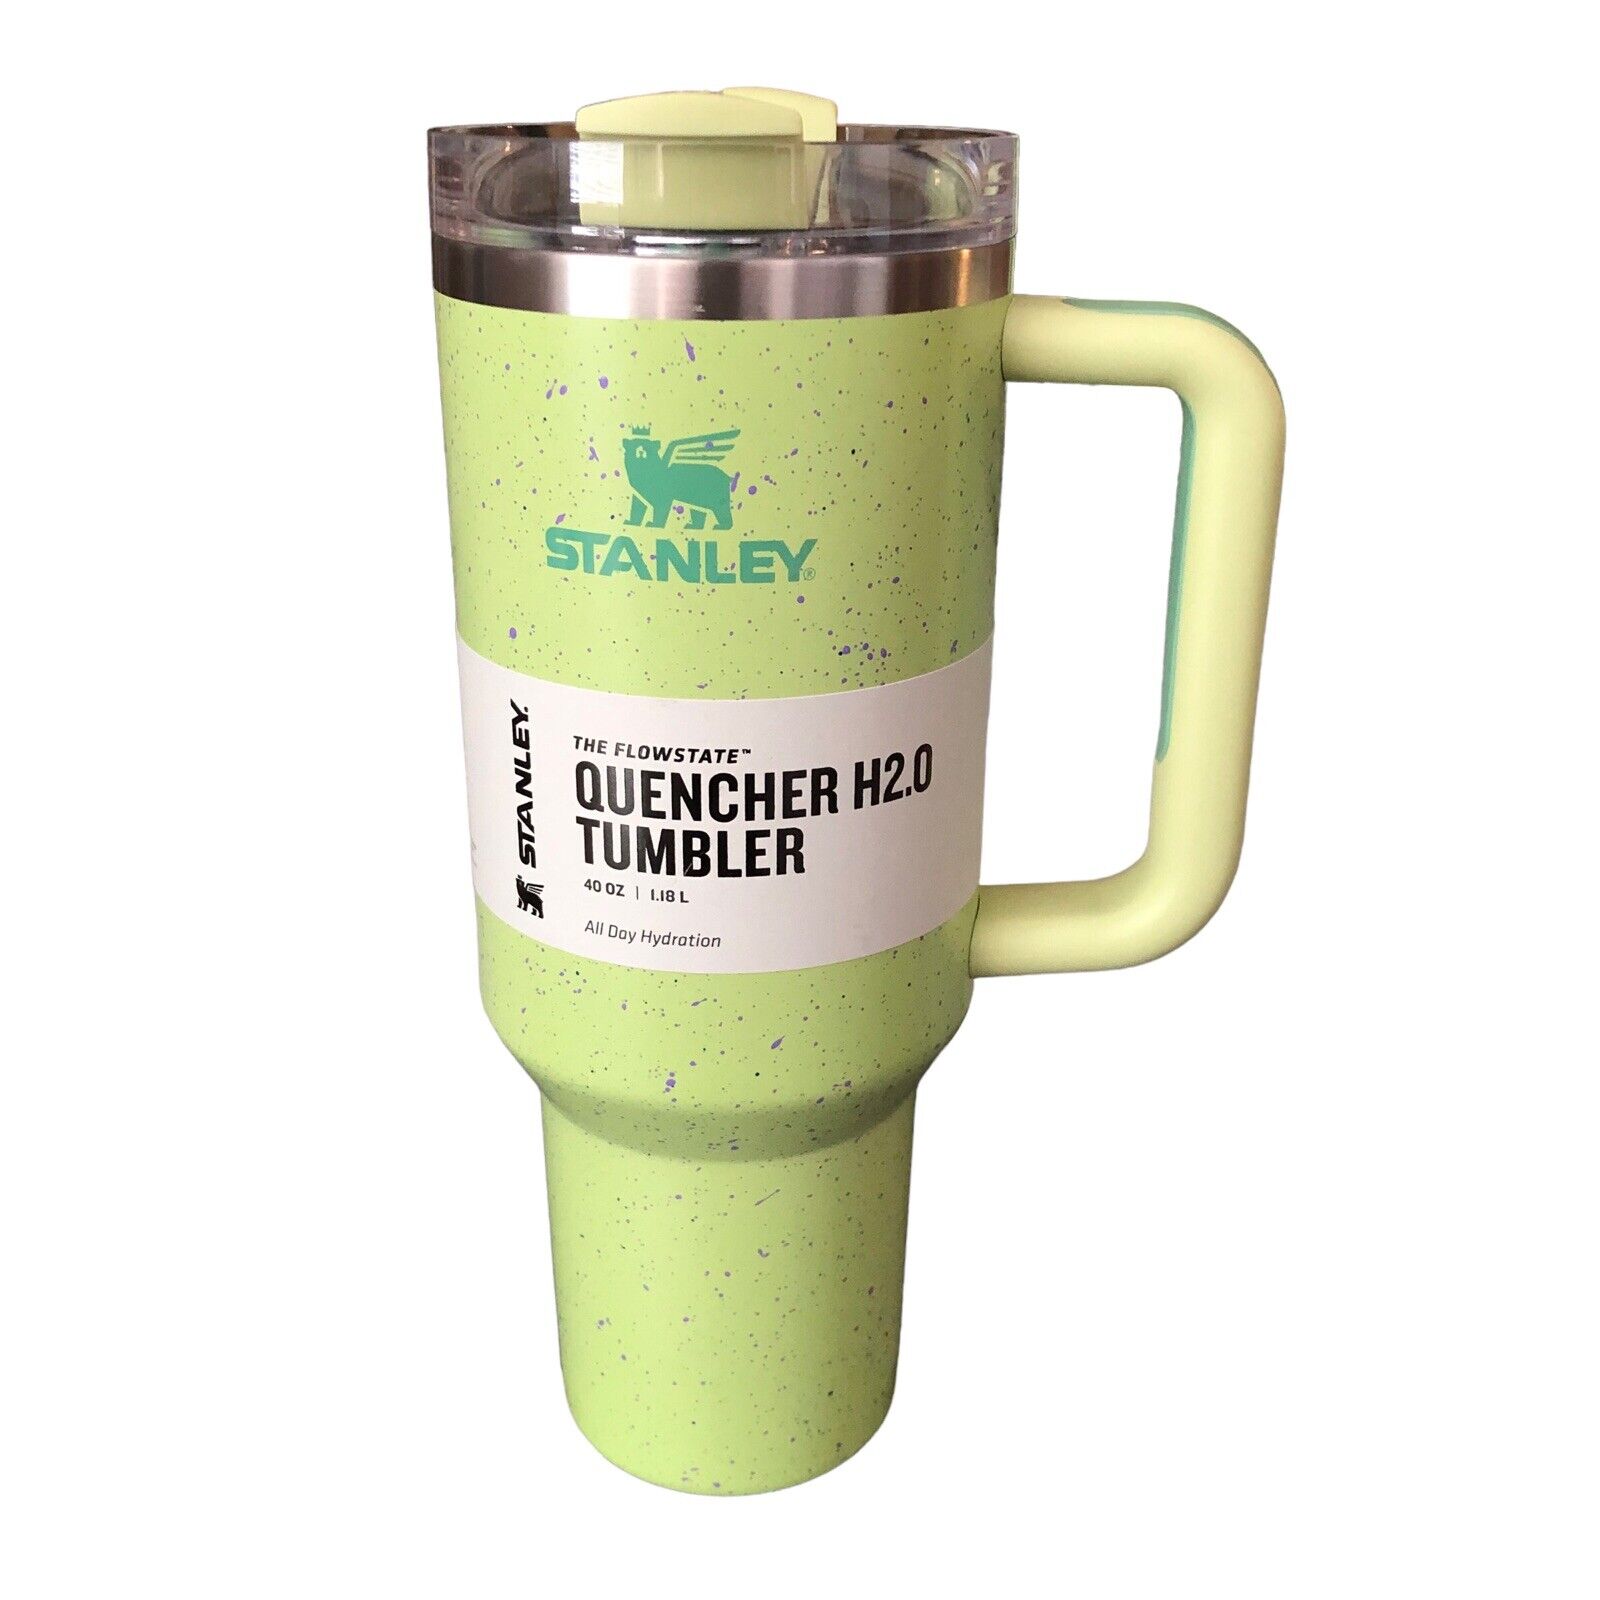 New Stanley Quencher H2.0 Tumbler Straw Cup 30oz Citron Speckle NWT IN HAND!